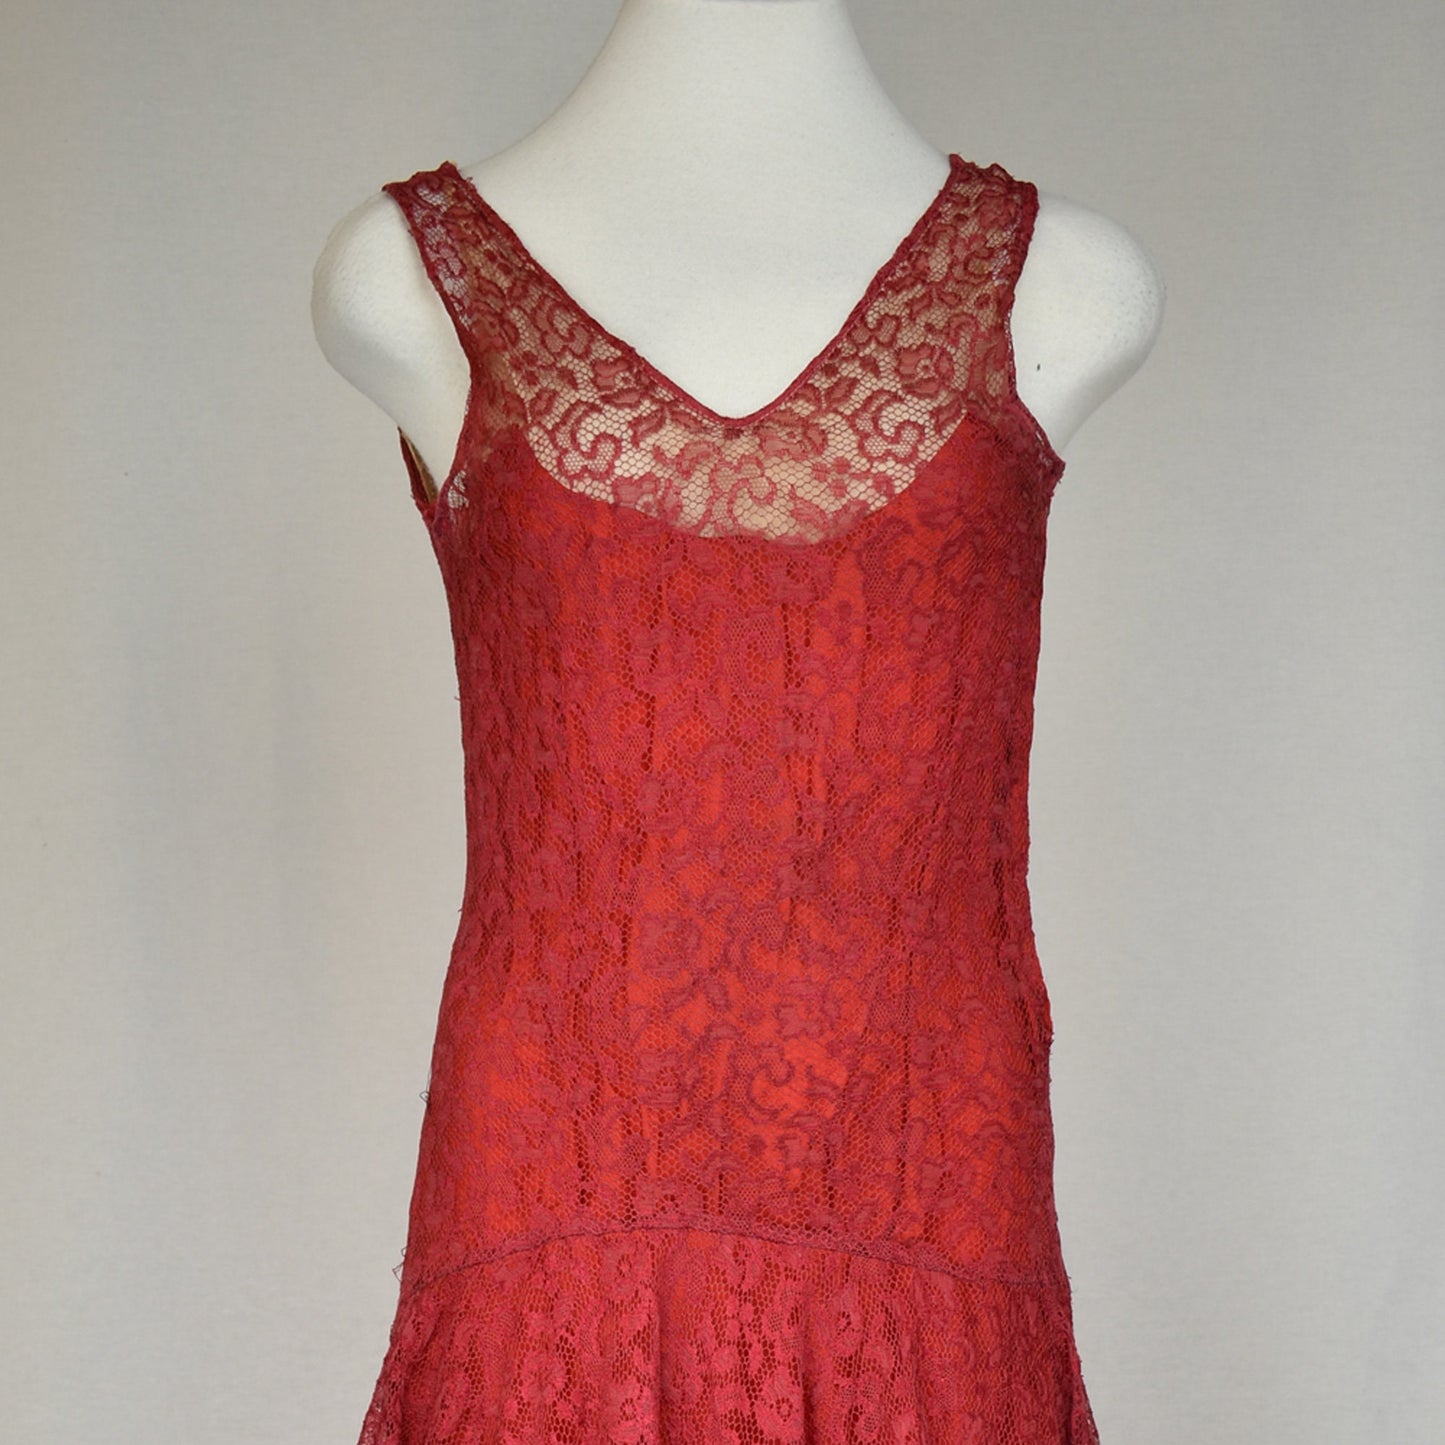 Vintage 1920s Long Tiered Red Lace Dress - Flapper Style - As Is Condition